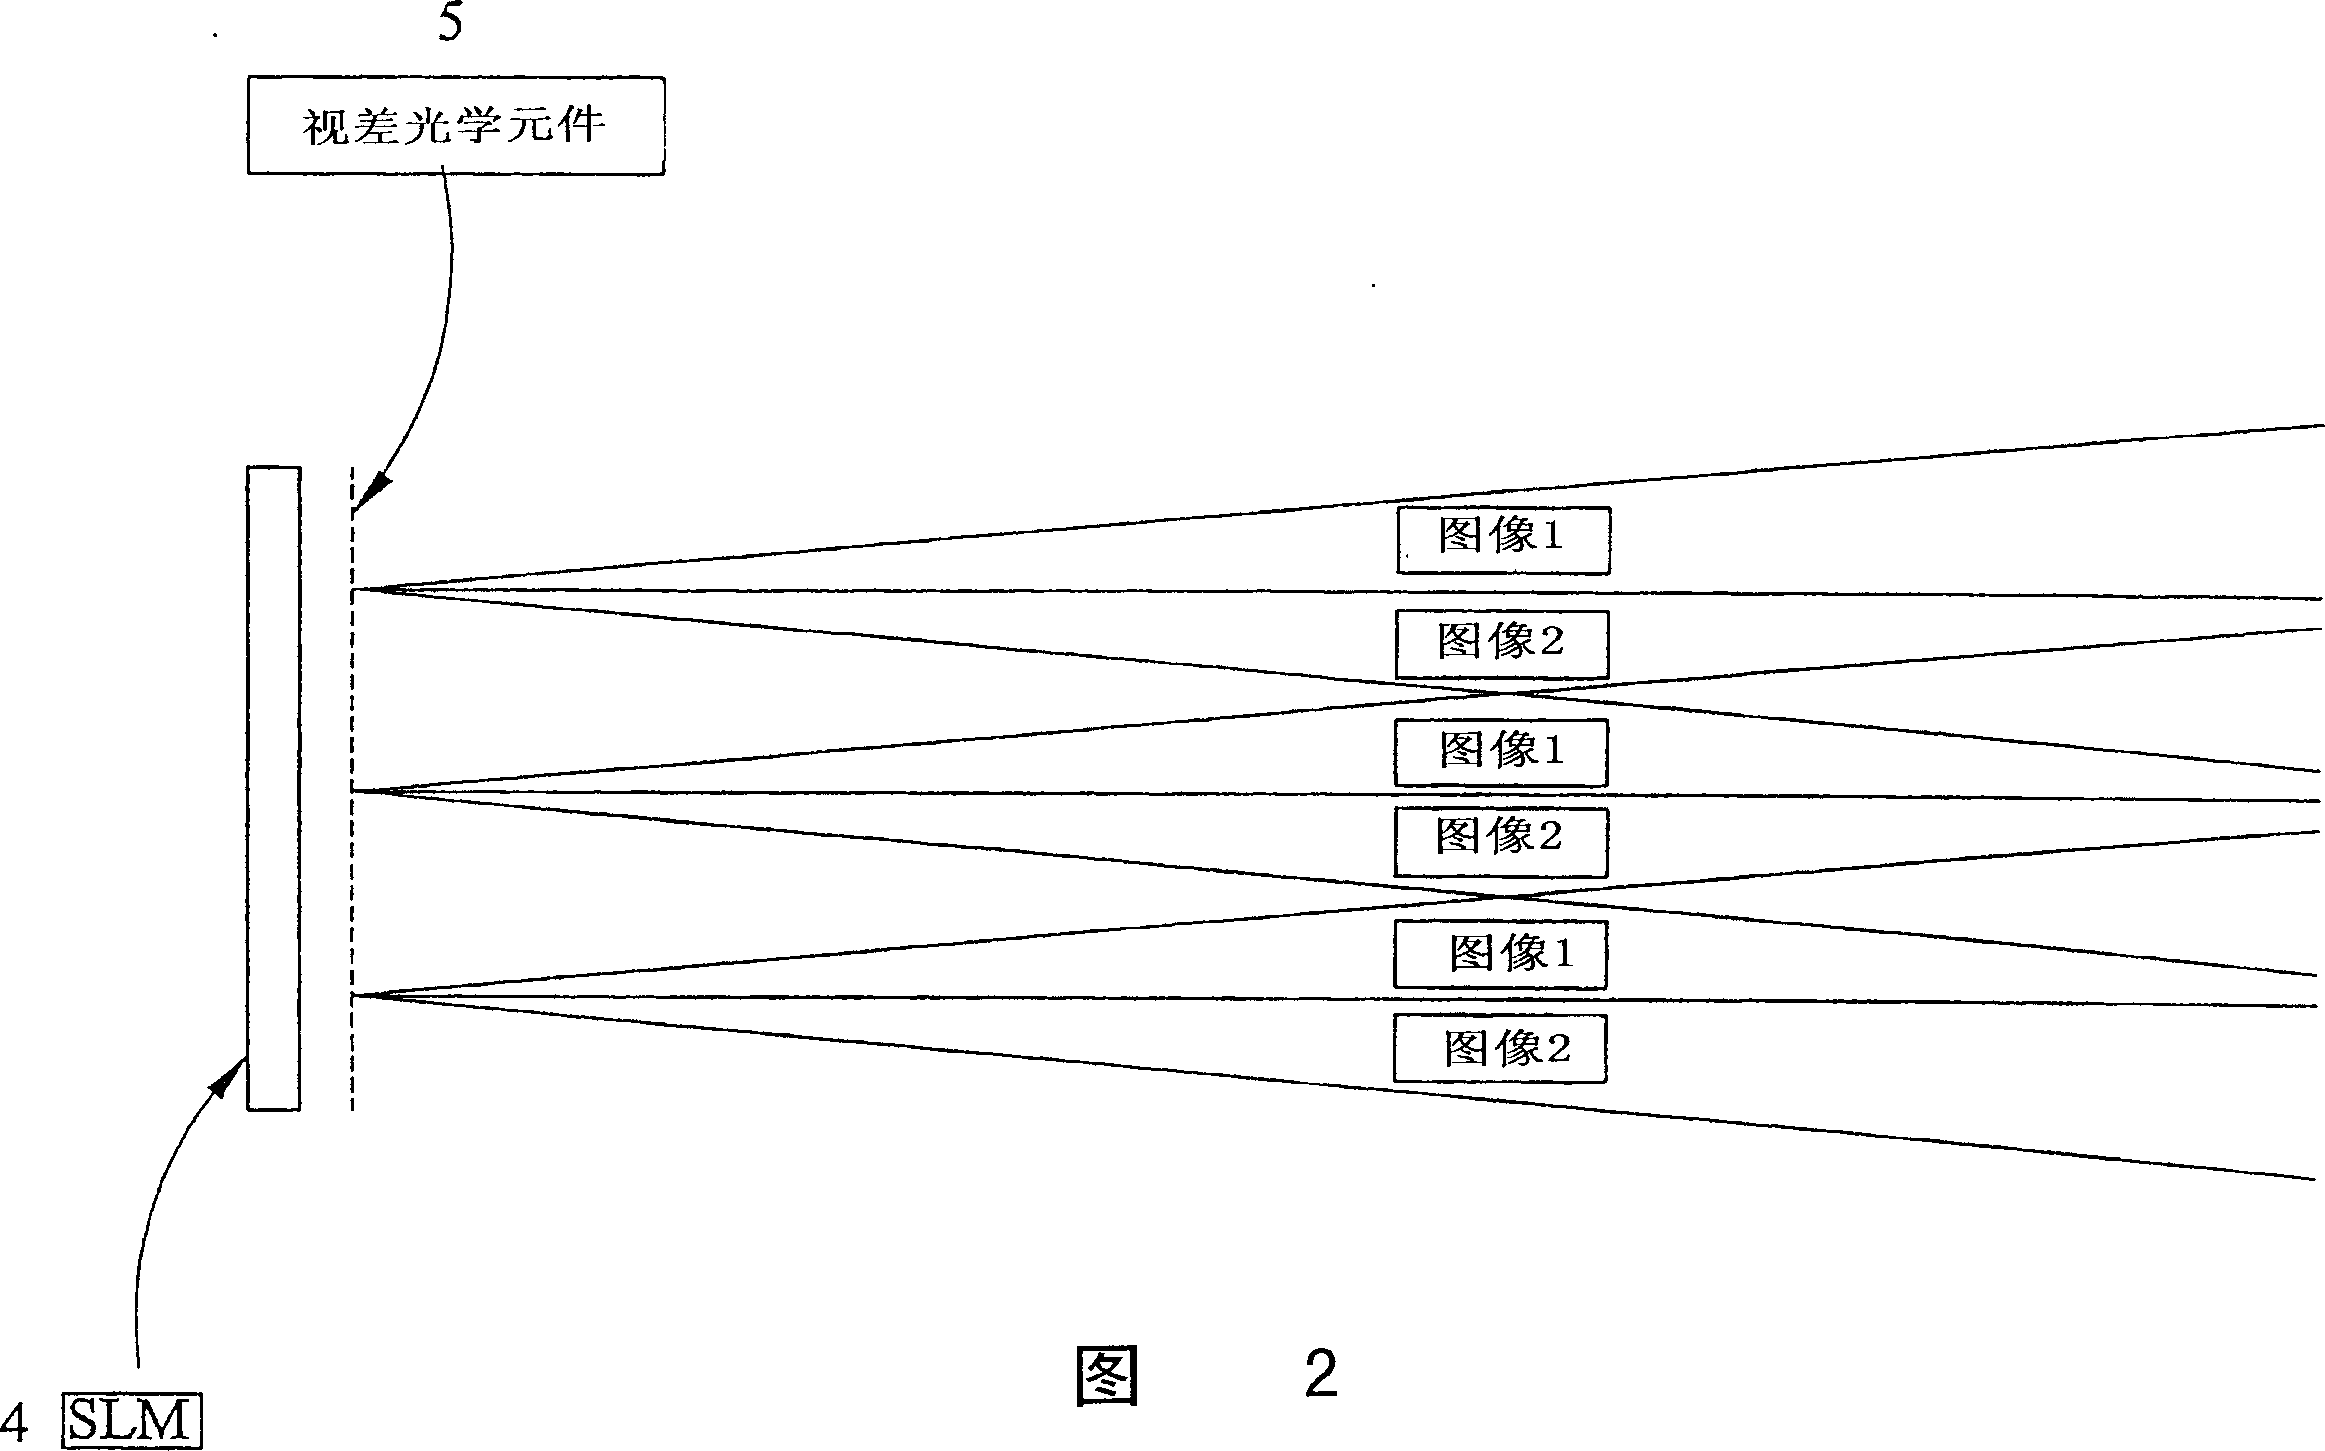 A multiple-view directional display